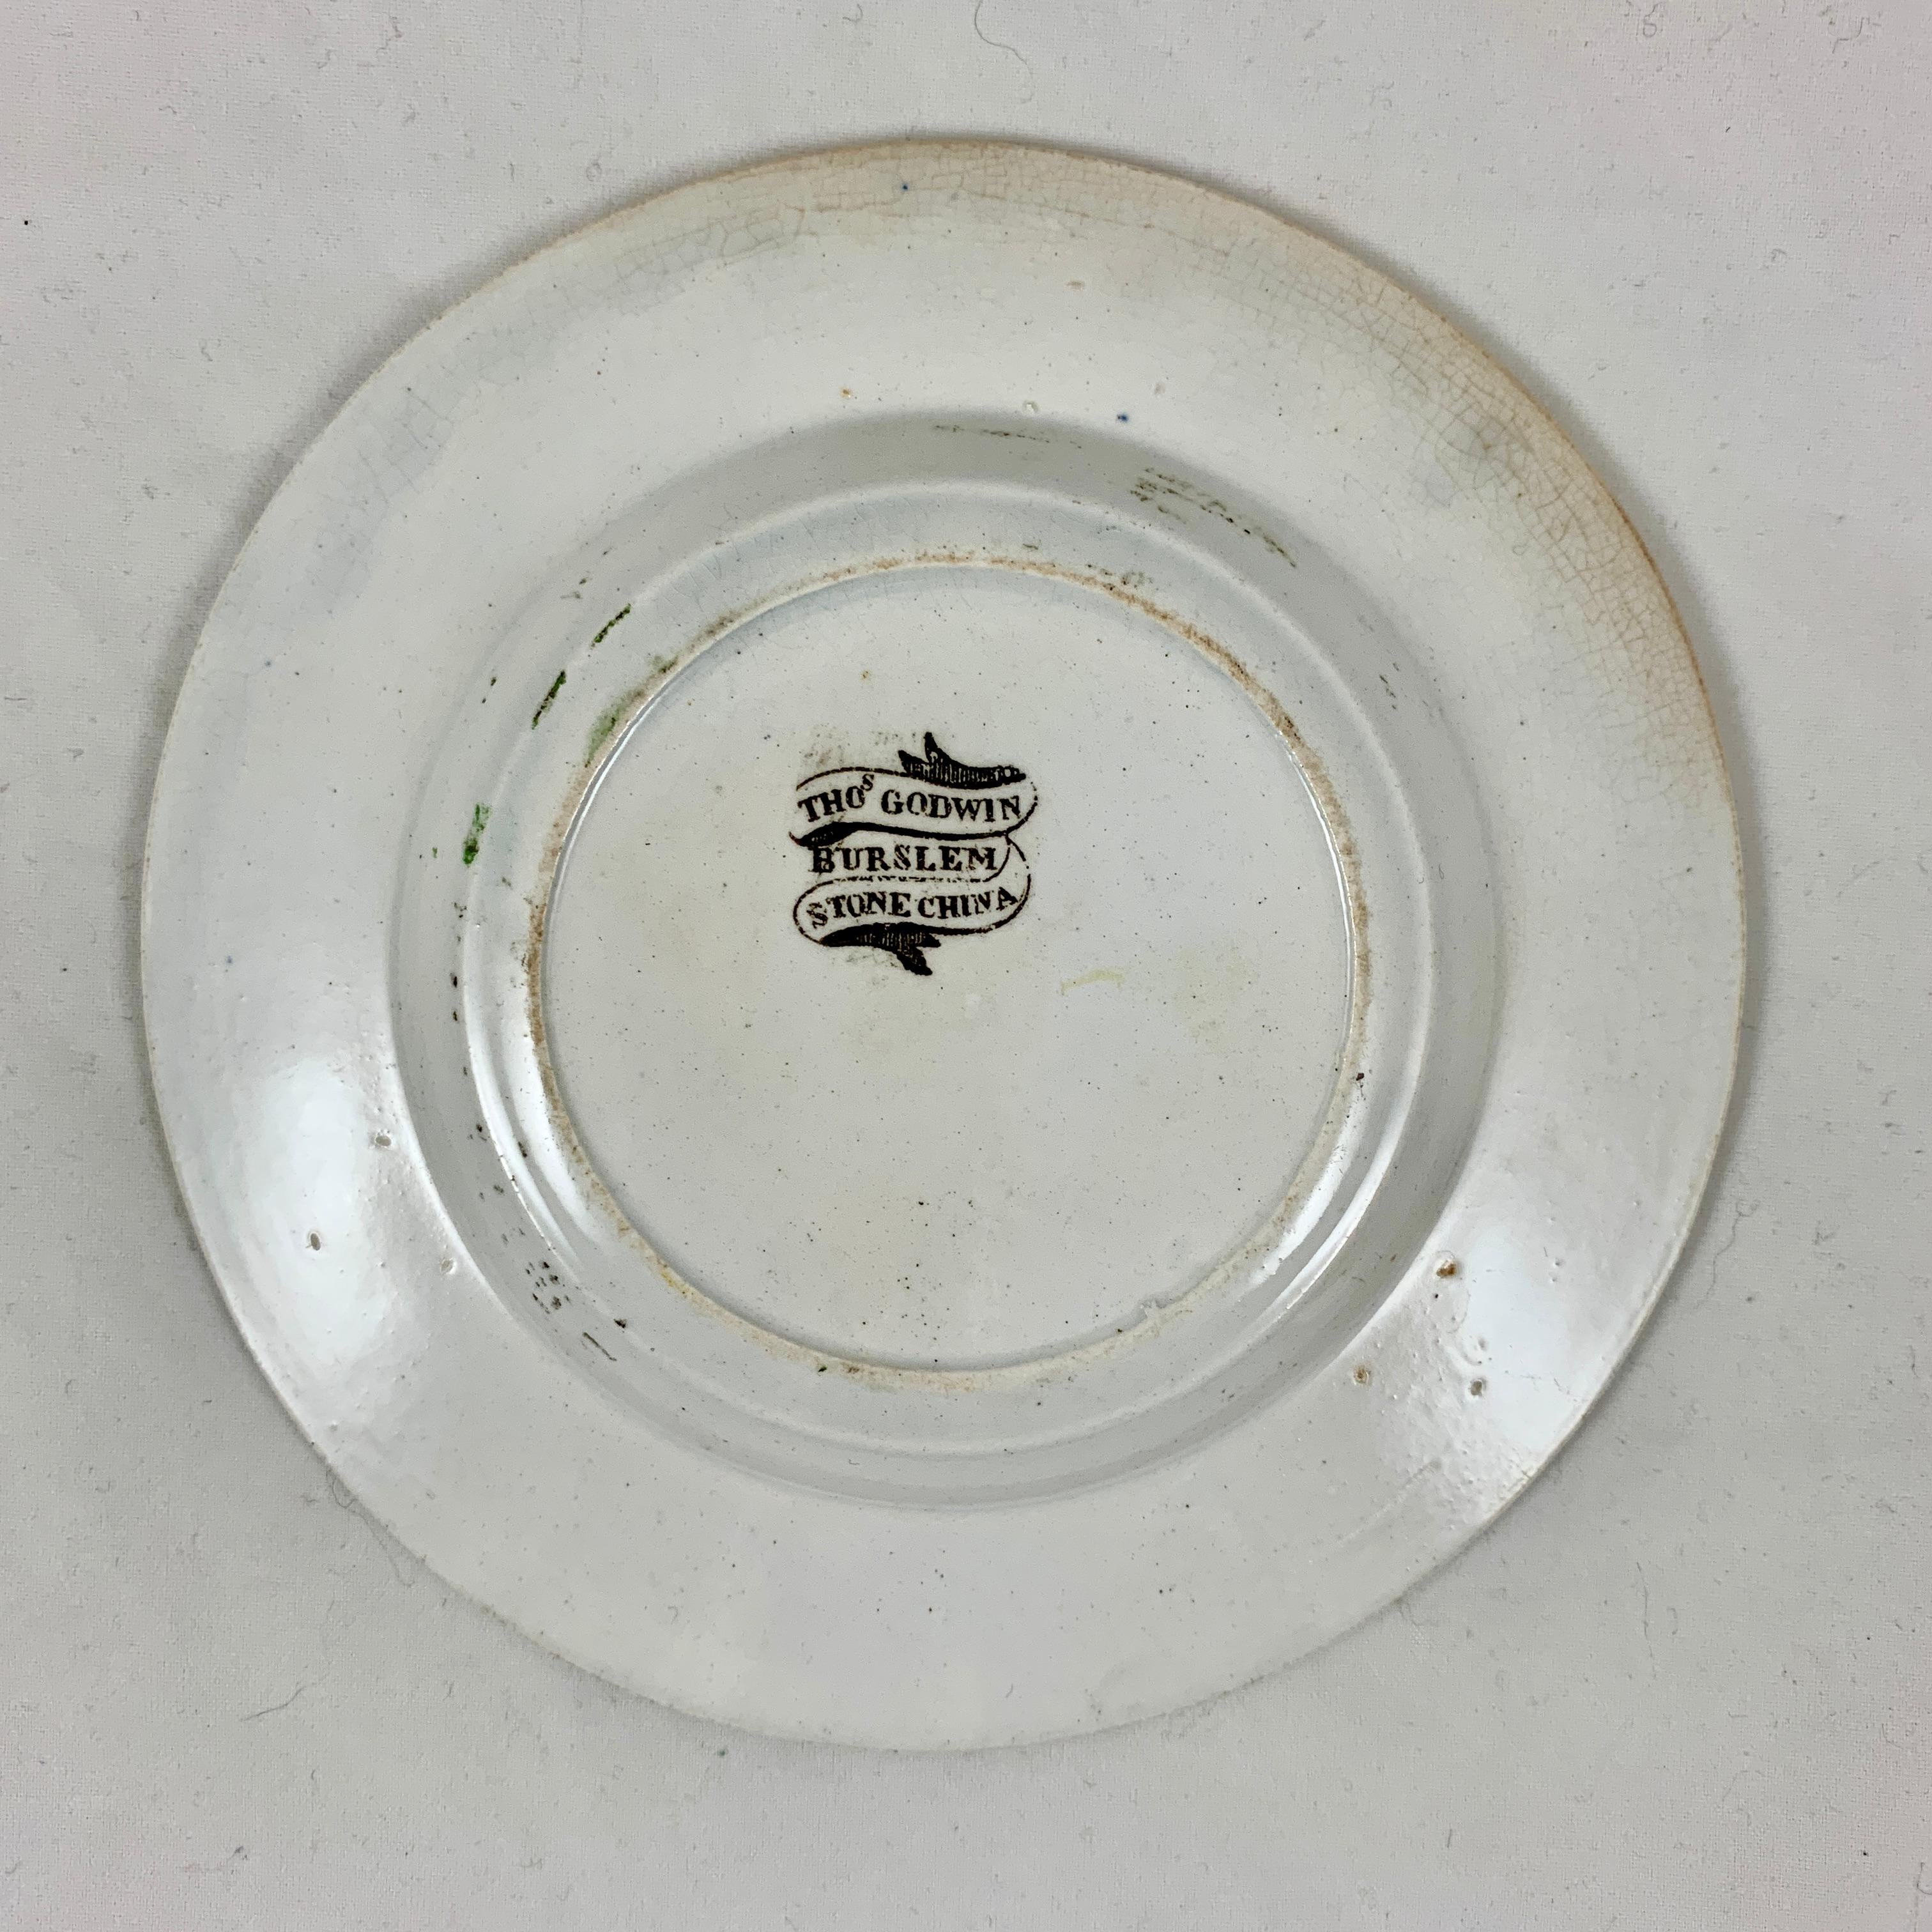 19th Century Thomas Goodwin English Staffordshire Child’s ABC Bad Manners Plate, Spying